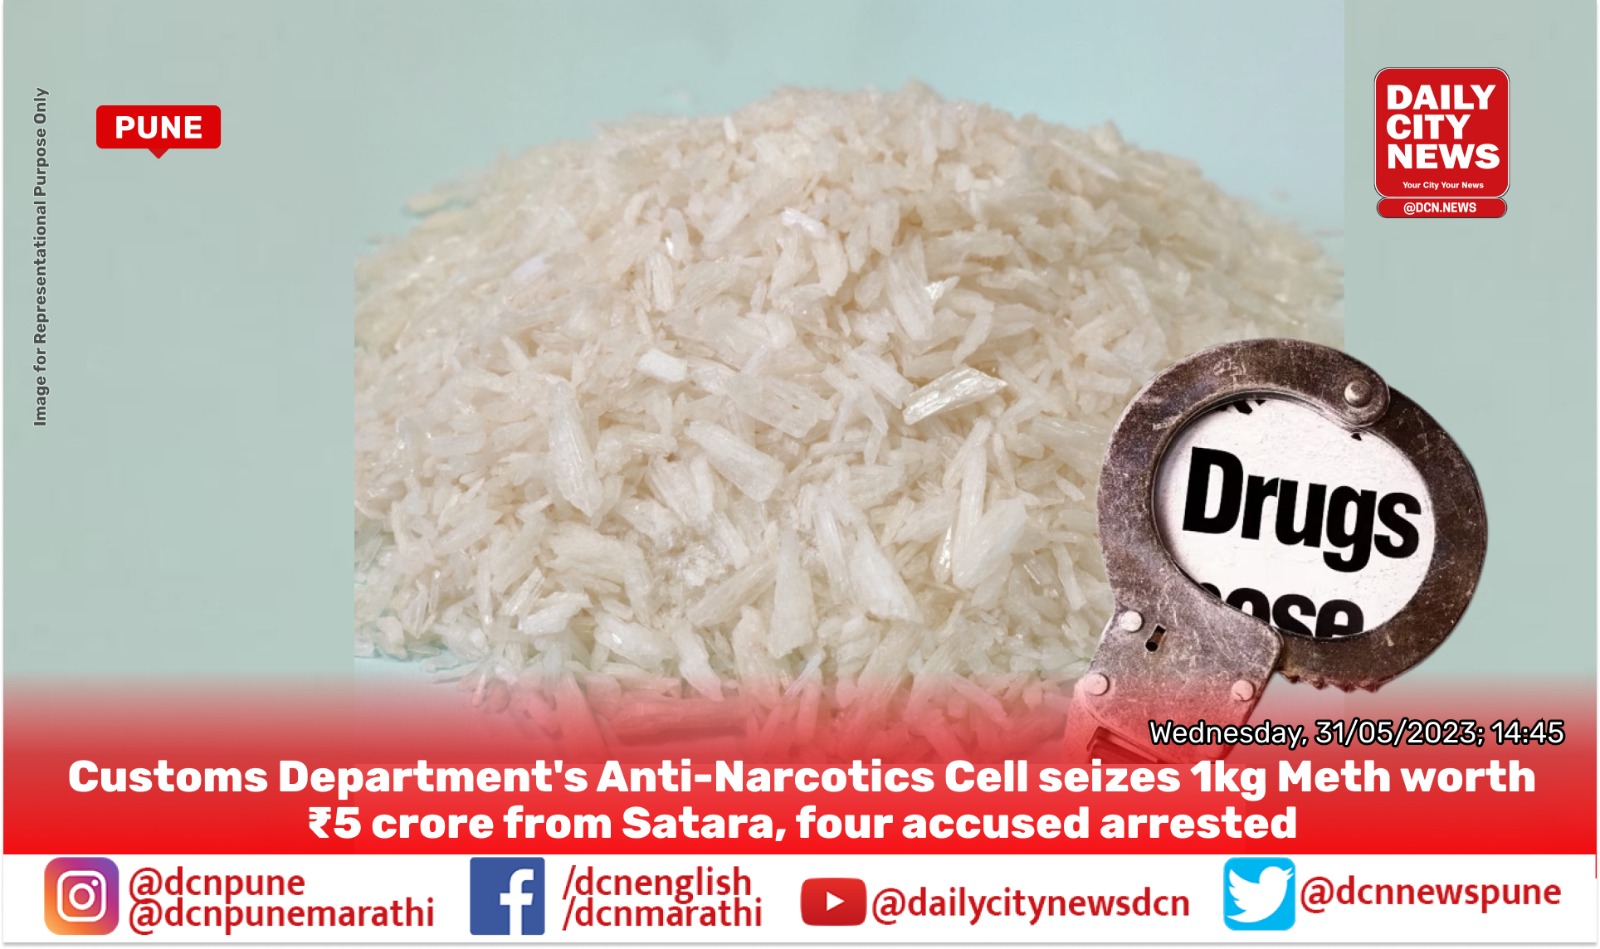 Customs Department's Anti-Narcotics Cell seizes 1kg Meth worth ₹5 crore from Satara, four accused arrested